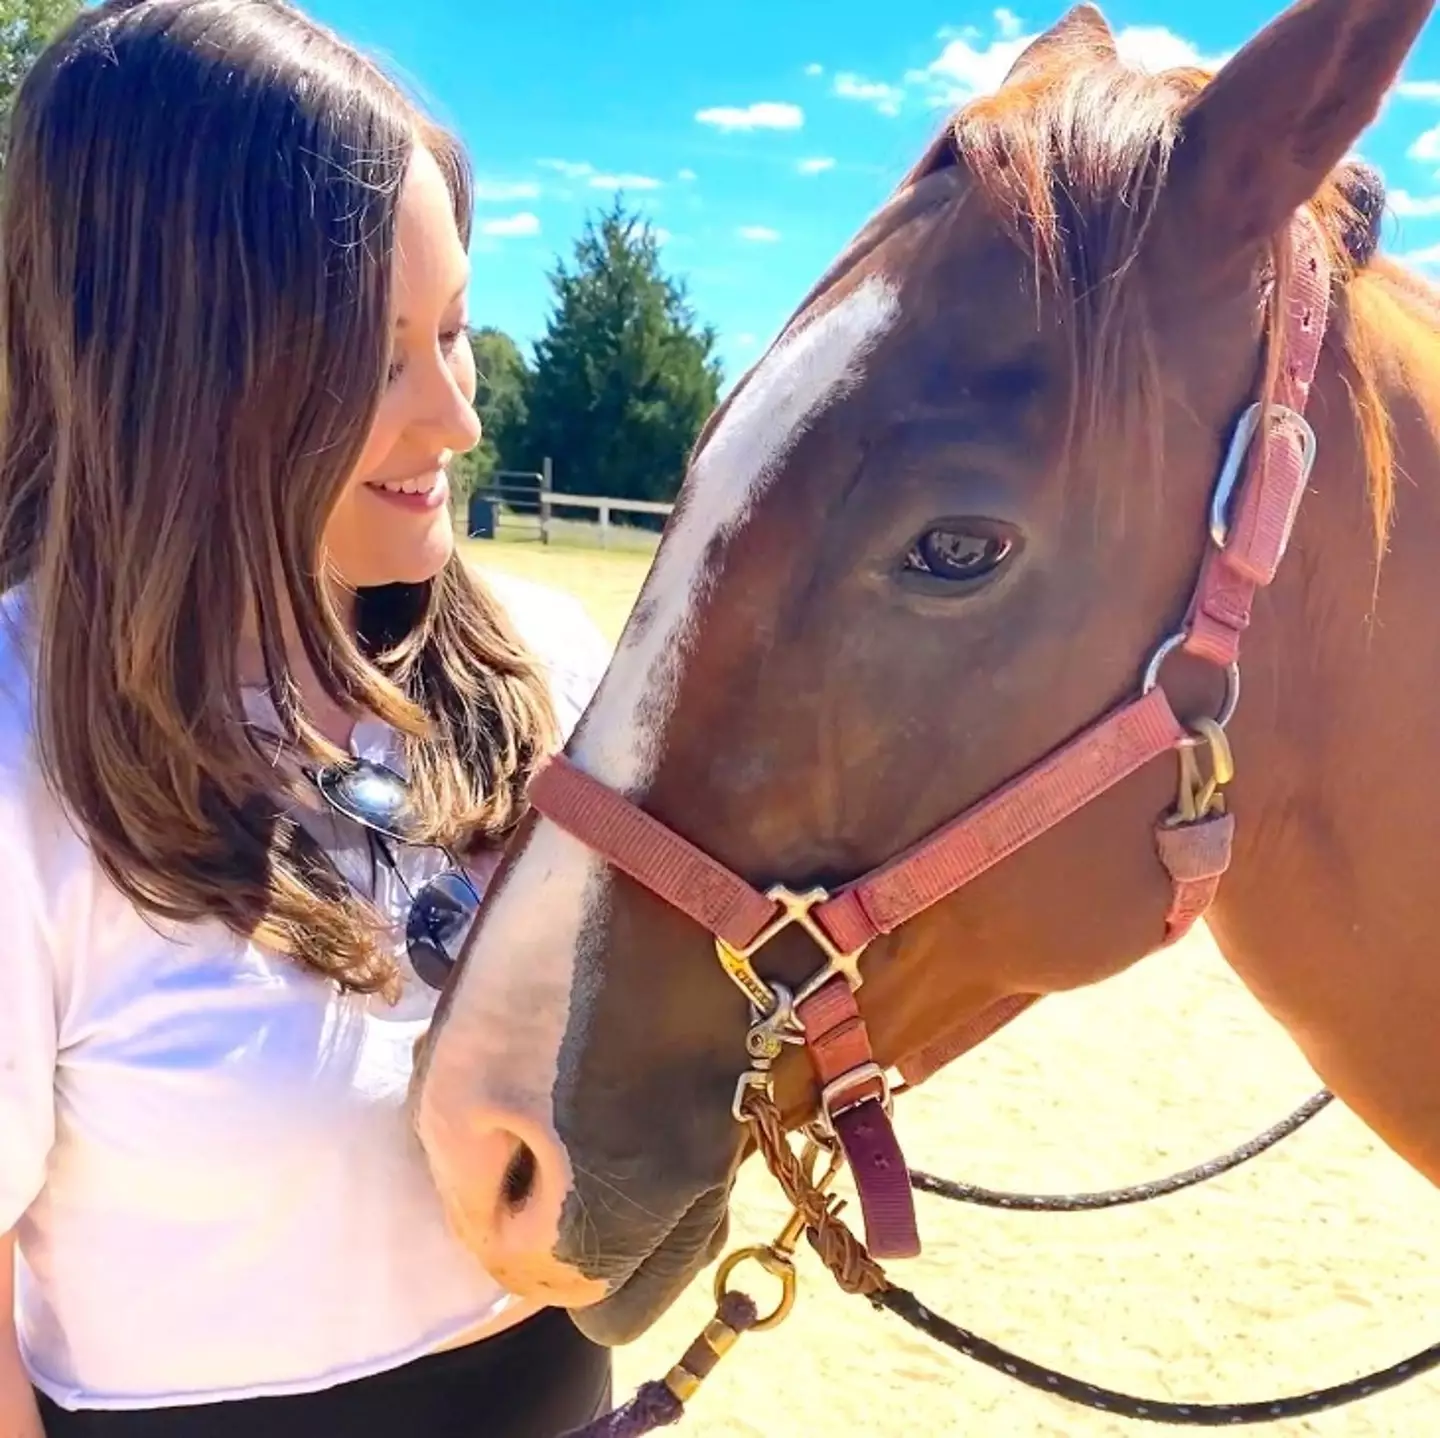 The 27-year-old has been laid off three times in as many years, but at least she met this horse.